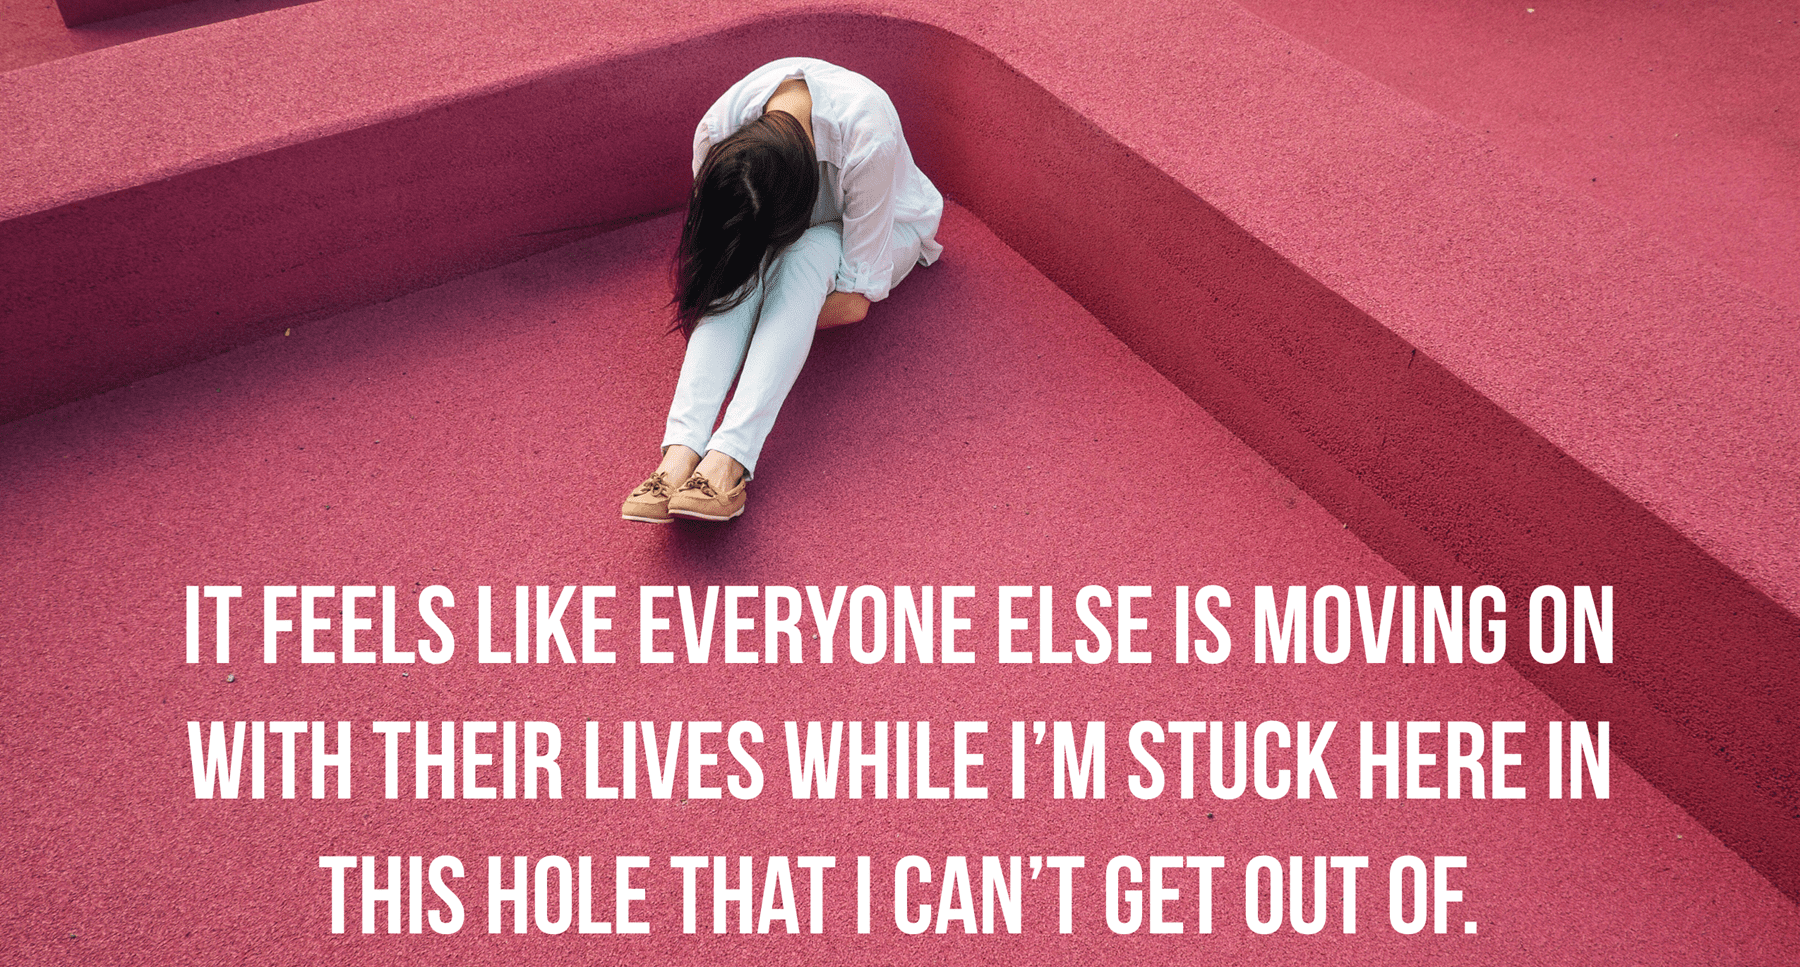 depression feels like you are in a hole and can't climb out